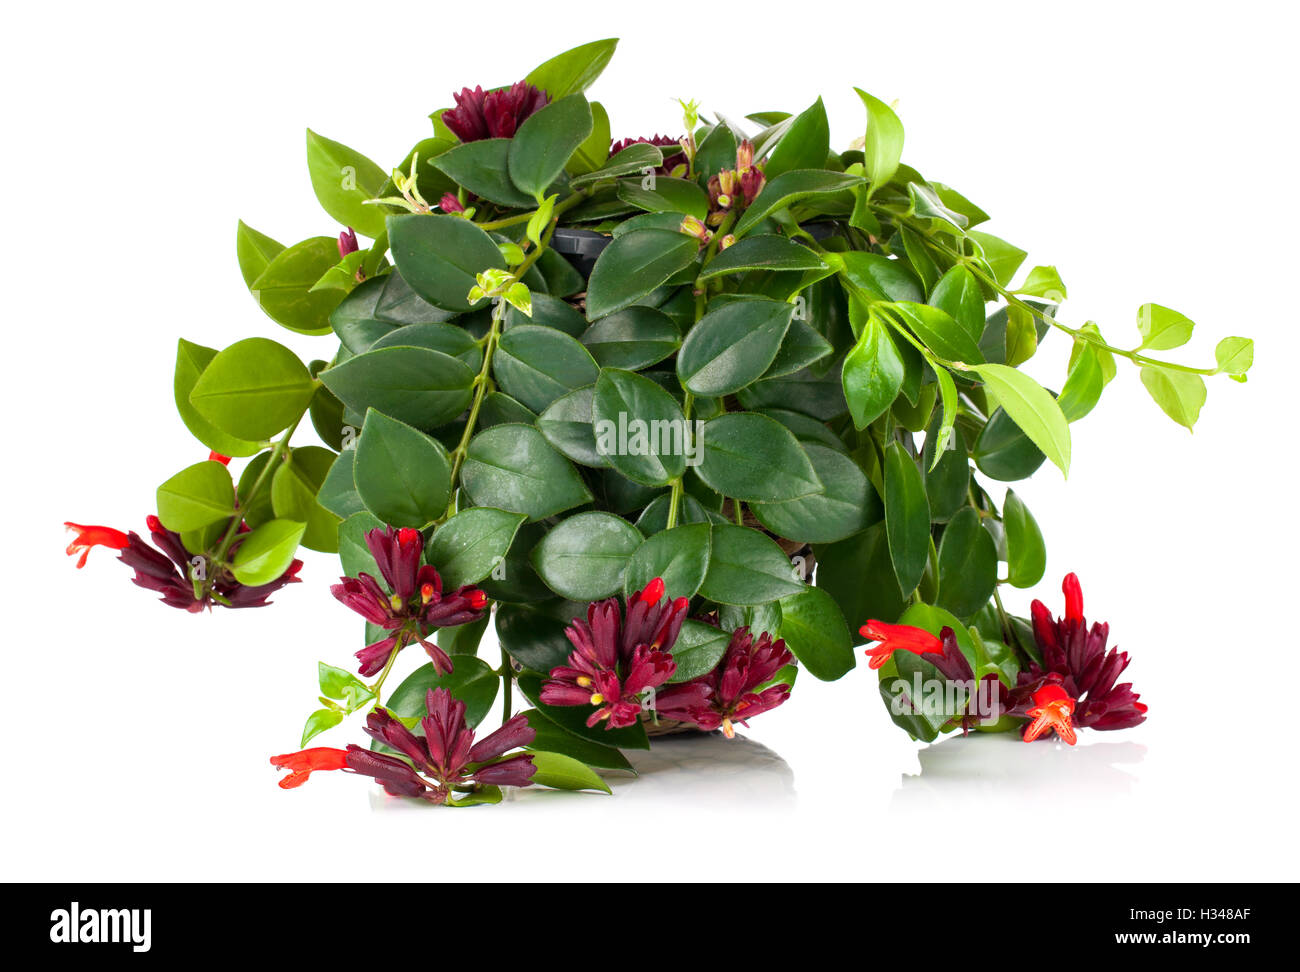 Lipstick Plant (Aeschynanthus radicans) in pot, isolated on whit Stock Photo